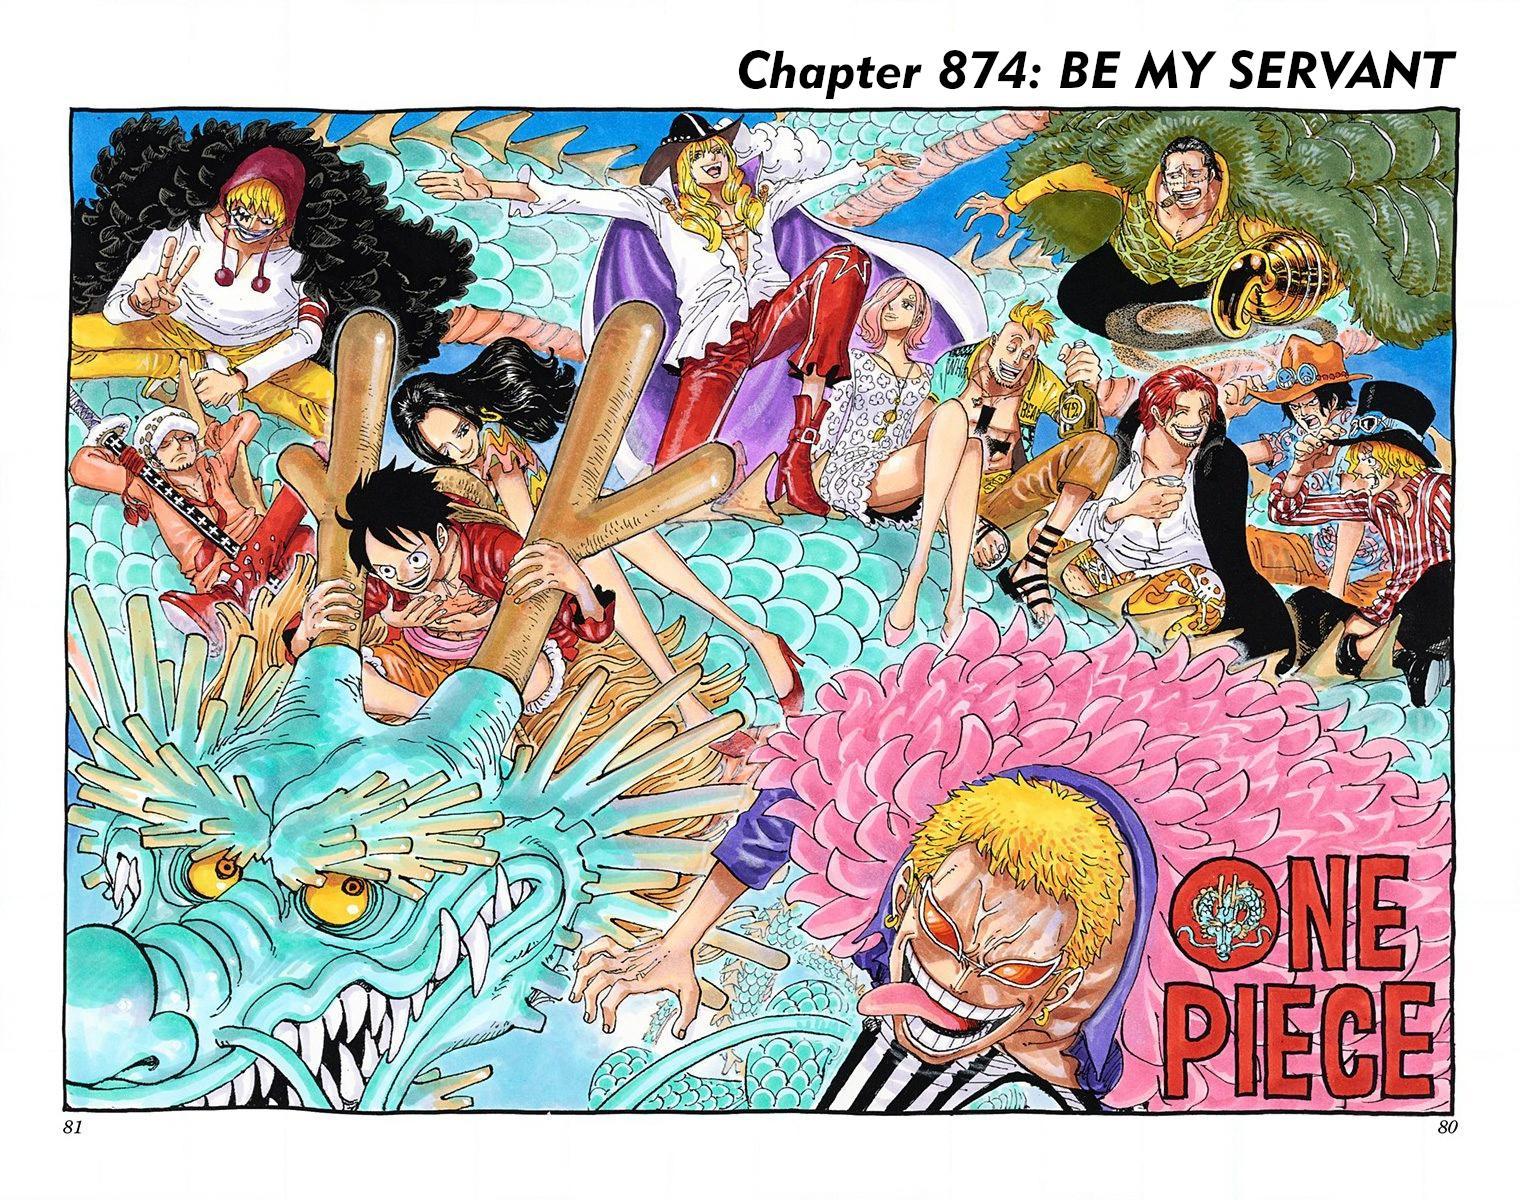 Right after Bell-Mere's death in Chapter 78, Nami has some